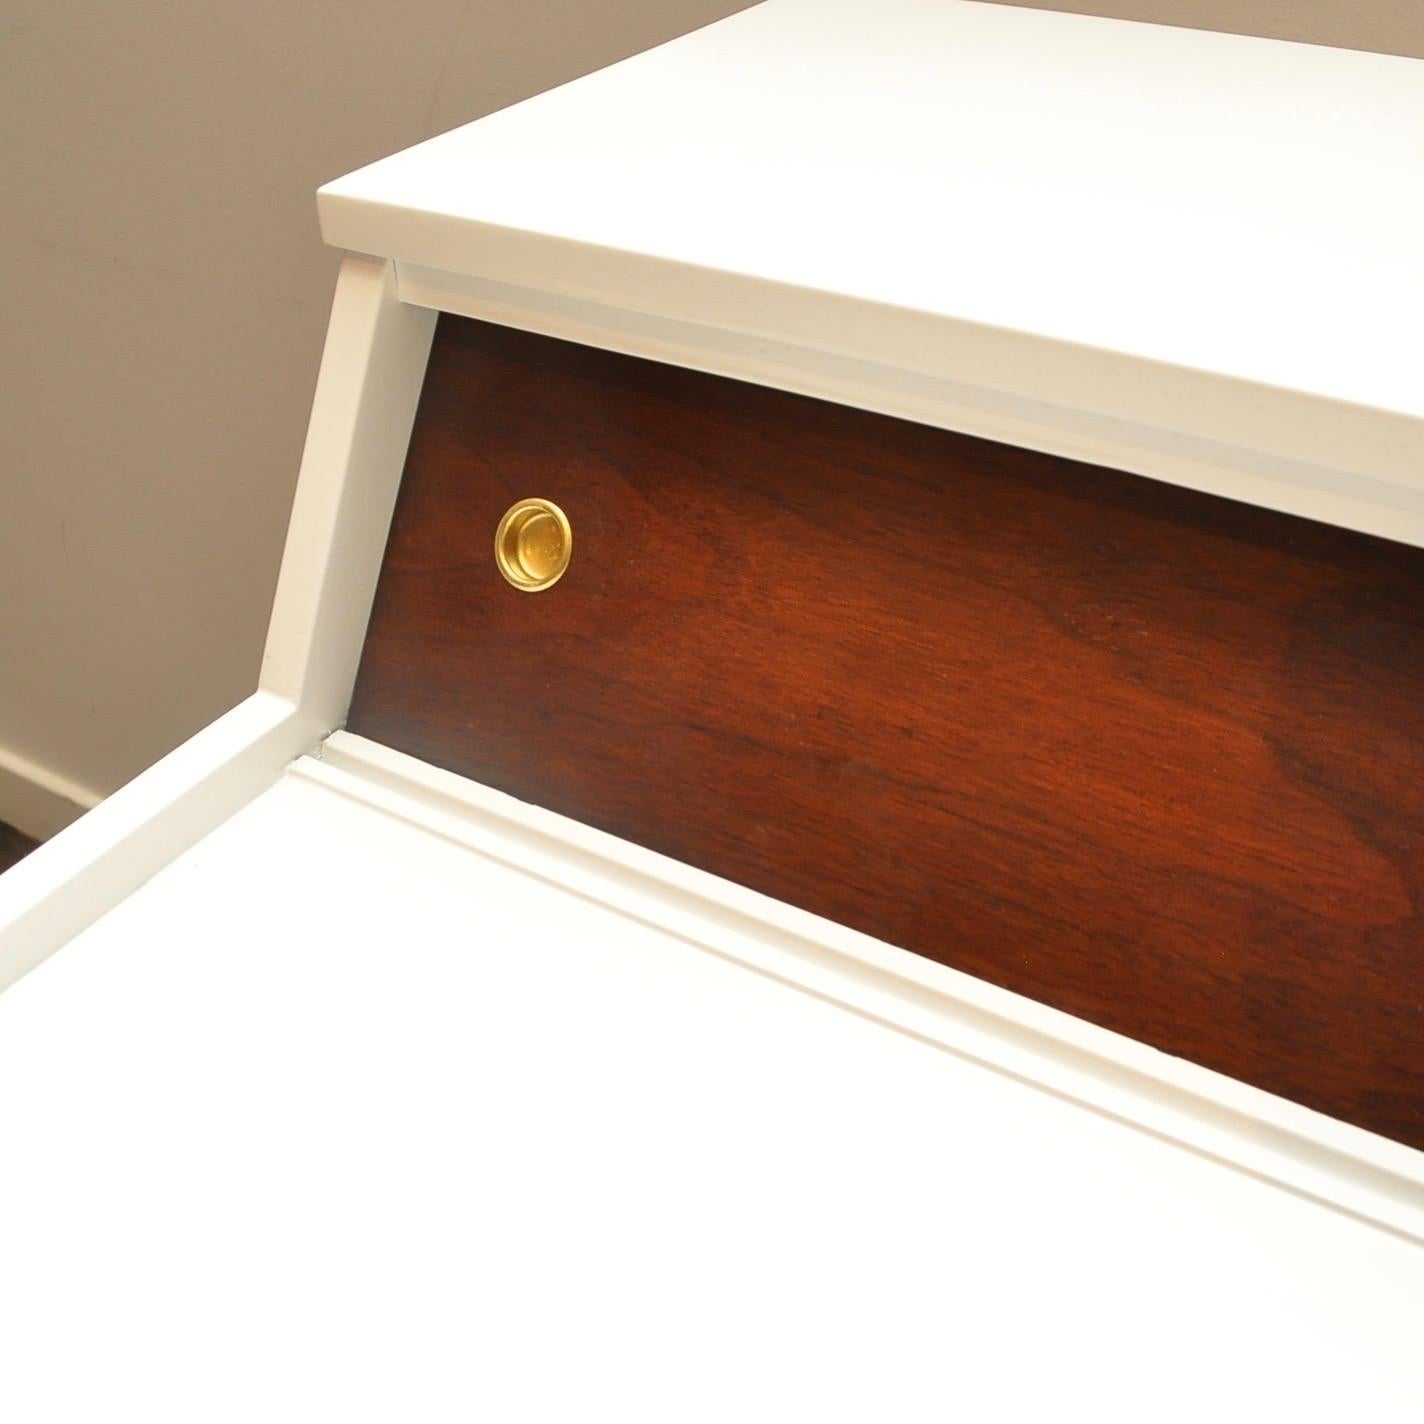 20th Century Lacquered Drexel Biscayne Desk 